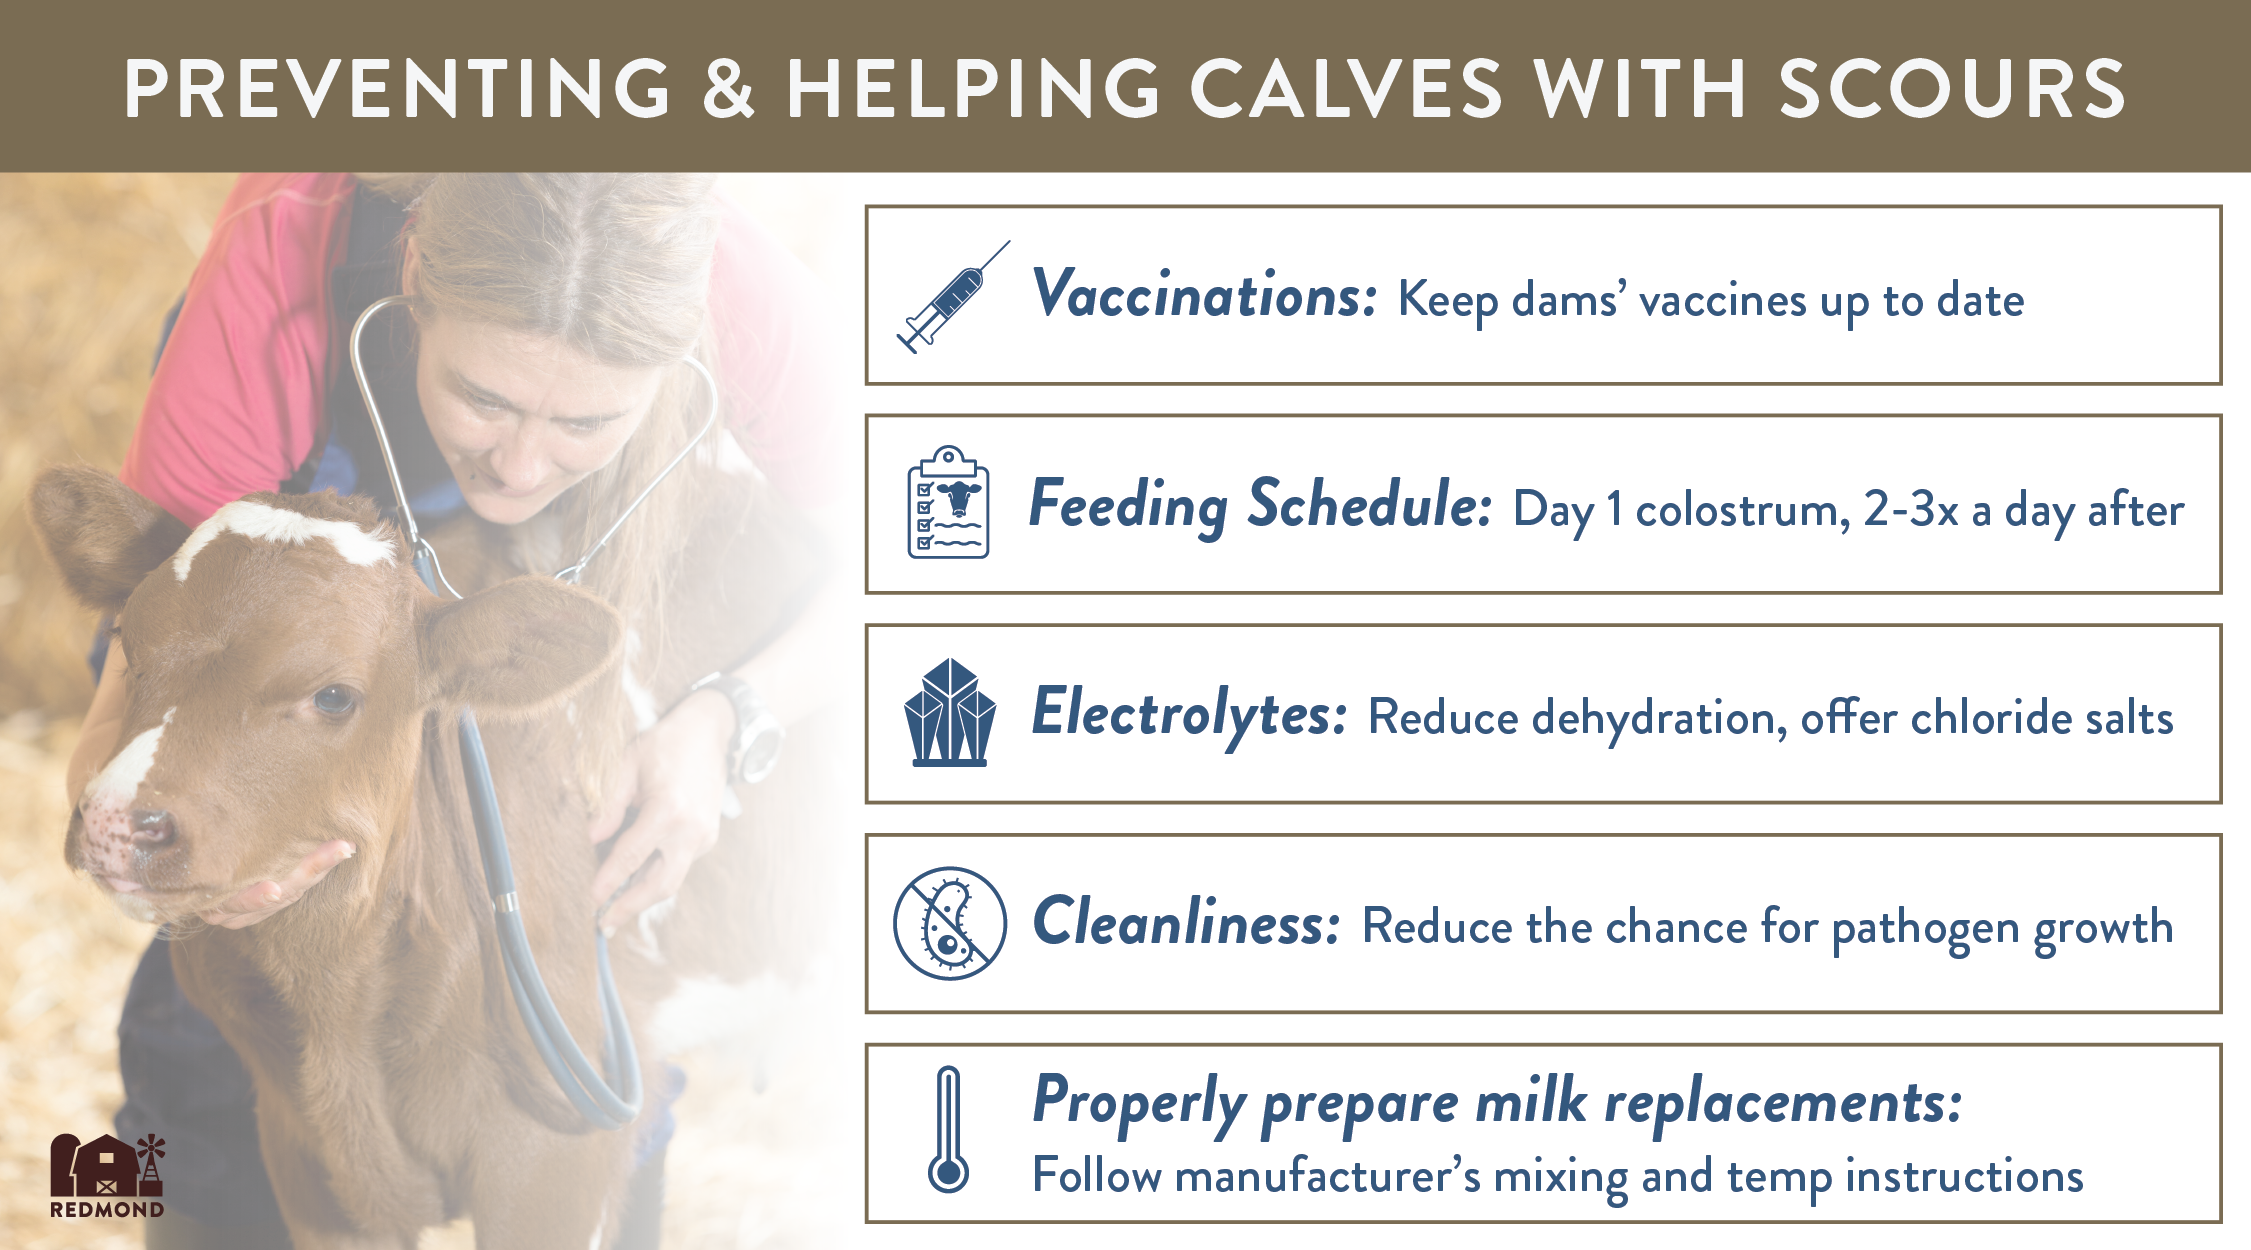 Preventing and helping calves with scours